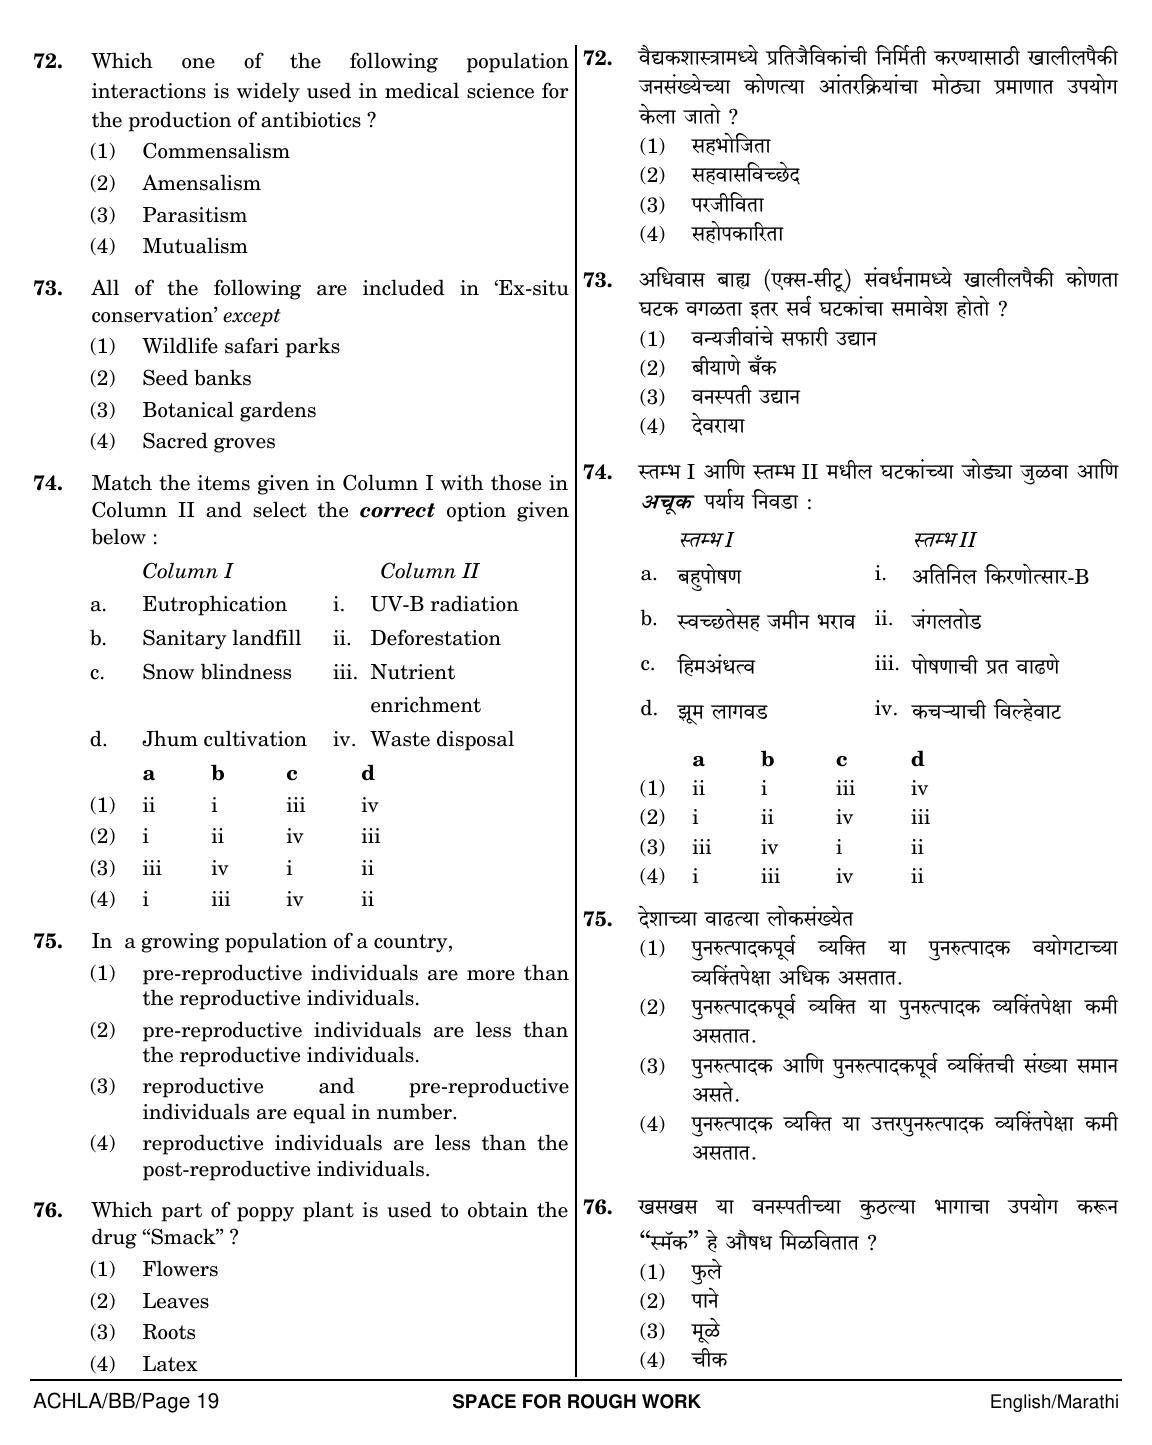 NEET Marathi BB 2018 Question Paper - Page 19